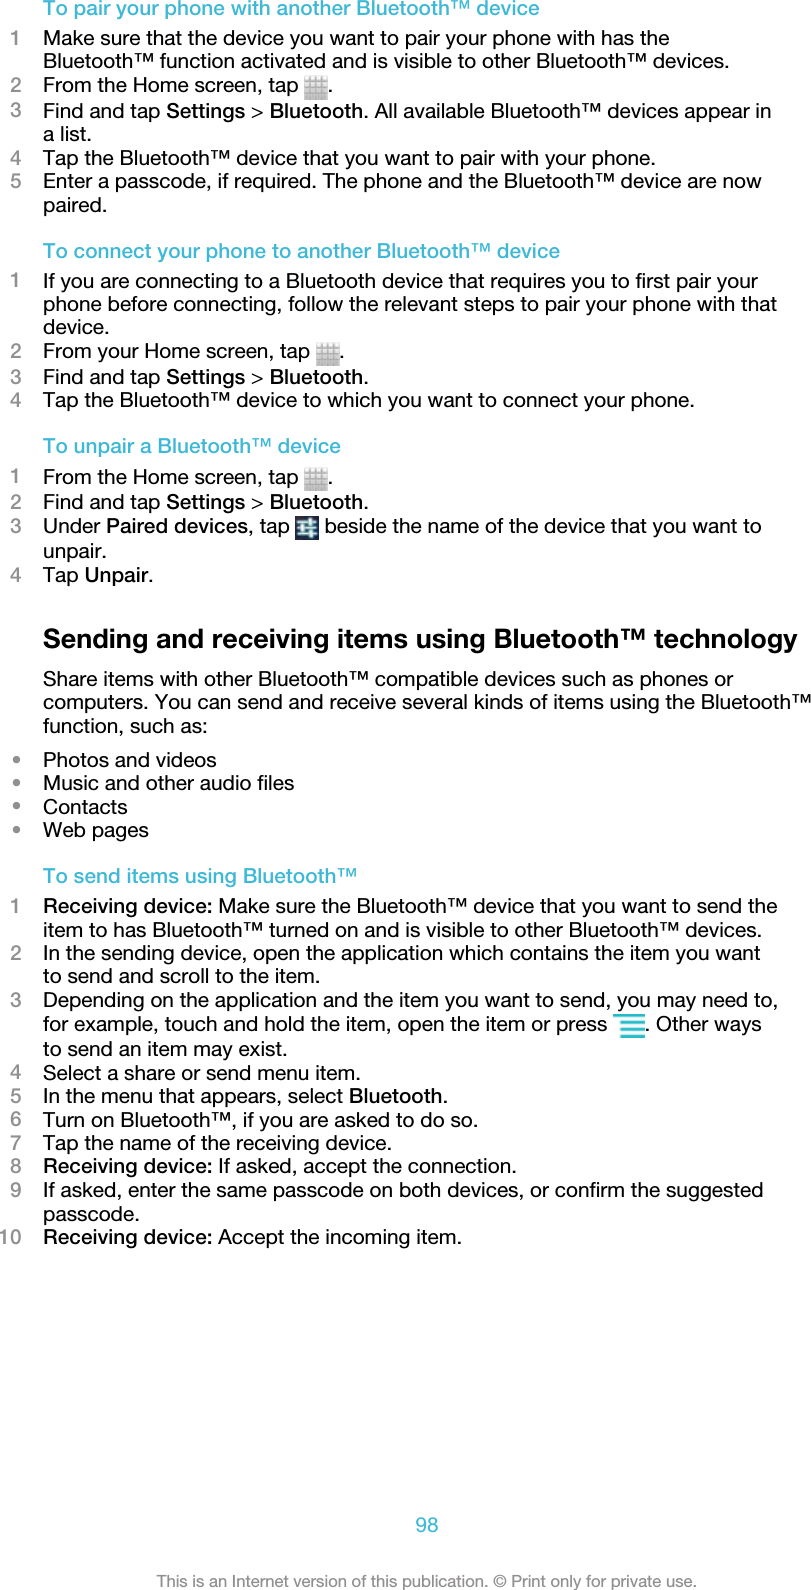 To pair your phone with another Bluetooth™ device1Make sure that the device you want to pair your phone with has theBluetooth™ function activated and is visible to other Bluetooth™ devices.2From the Home screen, tap  .3Find and tap Settings &gt; Bluetooth. All available Bluetooth™ devices appear ina list.4Tap the Bluetooth™ device that you want to pair with your phone.5Enter a passcode, if required. The phone and the Bluetooth™ device are nowpaired.To connect your phone to another Bluetooth™ device1If you are connecting to a Bluetooth device that requires you to first pair yourphone before connecting, follow the relevant steps to pair your phone with thatdevice.2From your Home screen, tap  .3Find and tap Settings &gt; Bluetooth.4Tap the Bluetooth™ device to which you want to connect your phone.To unpair a Bluetooth™ device1From the Home screen, tap  .2Find and tap Settings &gt; Bluetooth.3Under Paired devices, tap   beside the name of the device that you want tounpair.4Tap Unpair.Sending and receiving items using Bluetooth™ technologyShare items with other Bluetooth™ compatible devices such as phones orcomputers. You can send and receive several kinds of items using the Bluetooth™function, such as:•Photos and videos•Music and other audio files•Contacts•Web pagesTo send items using Bluetooth™1Receiving device: Make sure the Bluetooth™ device that you want to send theitem to has Bluetooth™ turned on and is visible to other Bluetooth™ devices.2In the sending device, open the application which contains the item you wantto send and scroll to the item.3Depending on the application and the item you want to send, you may need to,for example, touch and hold the item, open the item or press  . Other waysto send an item may exist.4Select a share or send menu item.5In the menu that appears, select Bluetooth.6Turn on Bluetooth™, if you are asked to do so.7Tap the name of the receiving device.8Receiving device: If asked, accept the connection.9If asked, enter the same passcode on both devices, or confirm the suggestedpasscode.10 Receiving device: Accept the incoming item.98This is an Internet version of this publication. © Print only for private use.